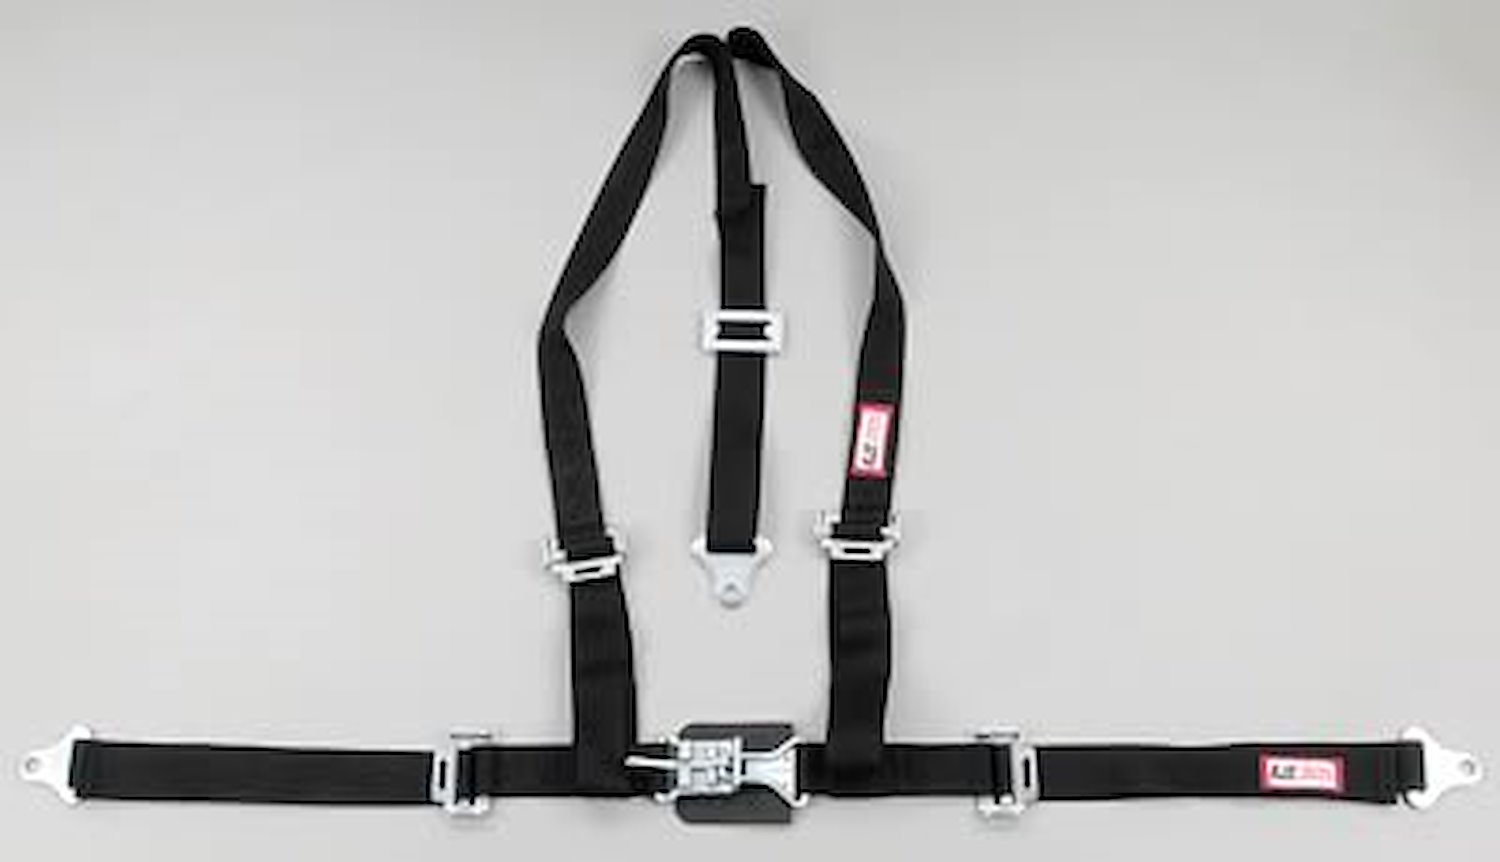 NON-SFI L&L HARNESS 3 PULL DOWN Lap Belt w/Adjuster SNAP 2 S.H. Y FLOOR Mount WRAP/SNAP HOT PINK